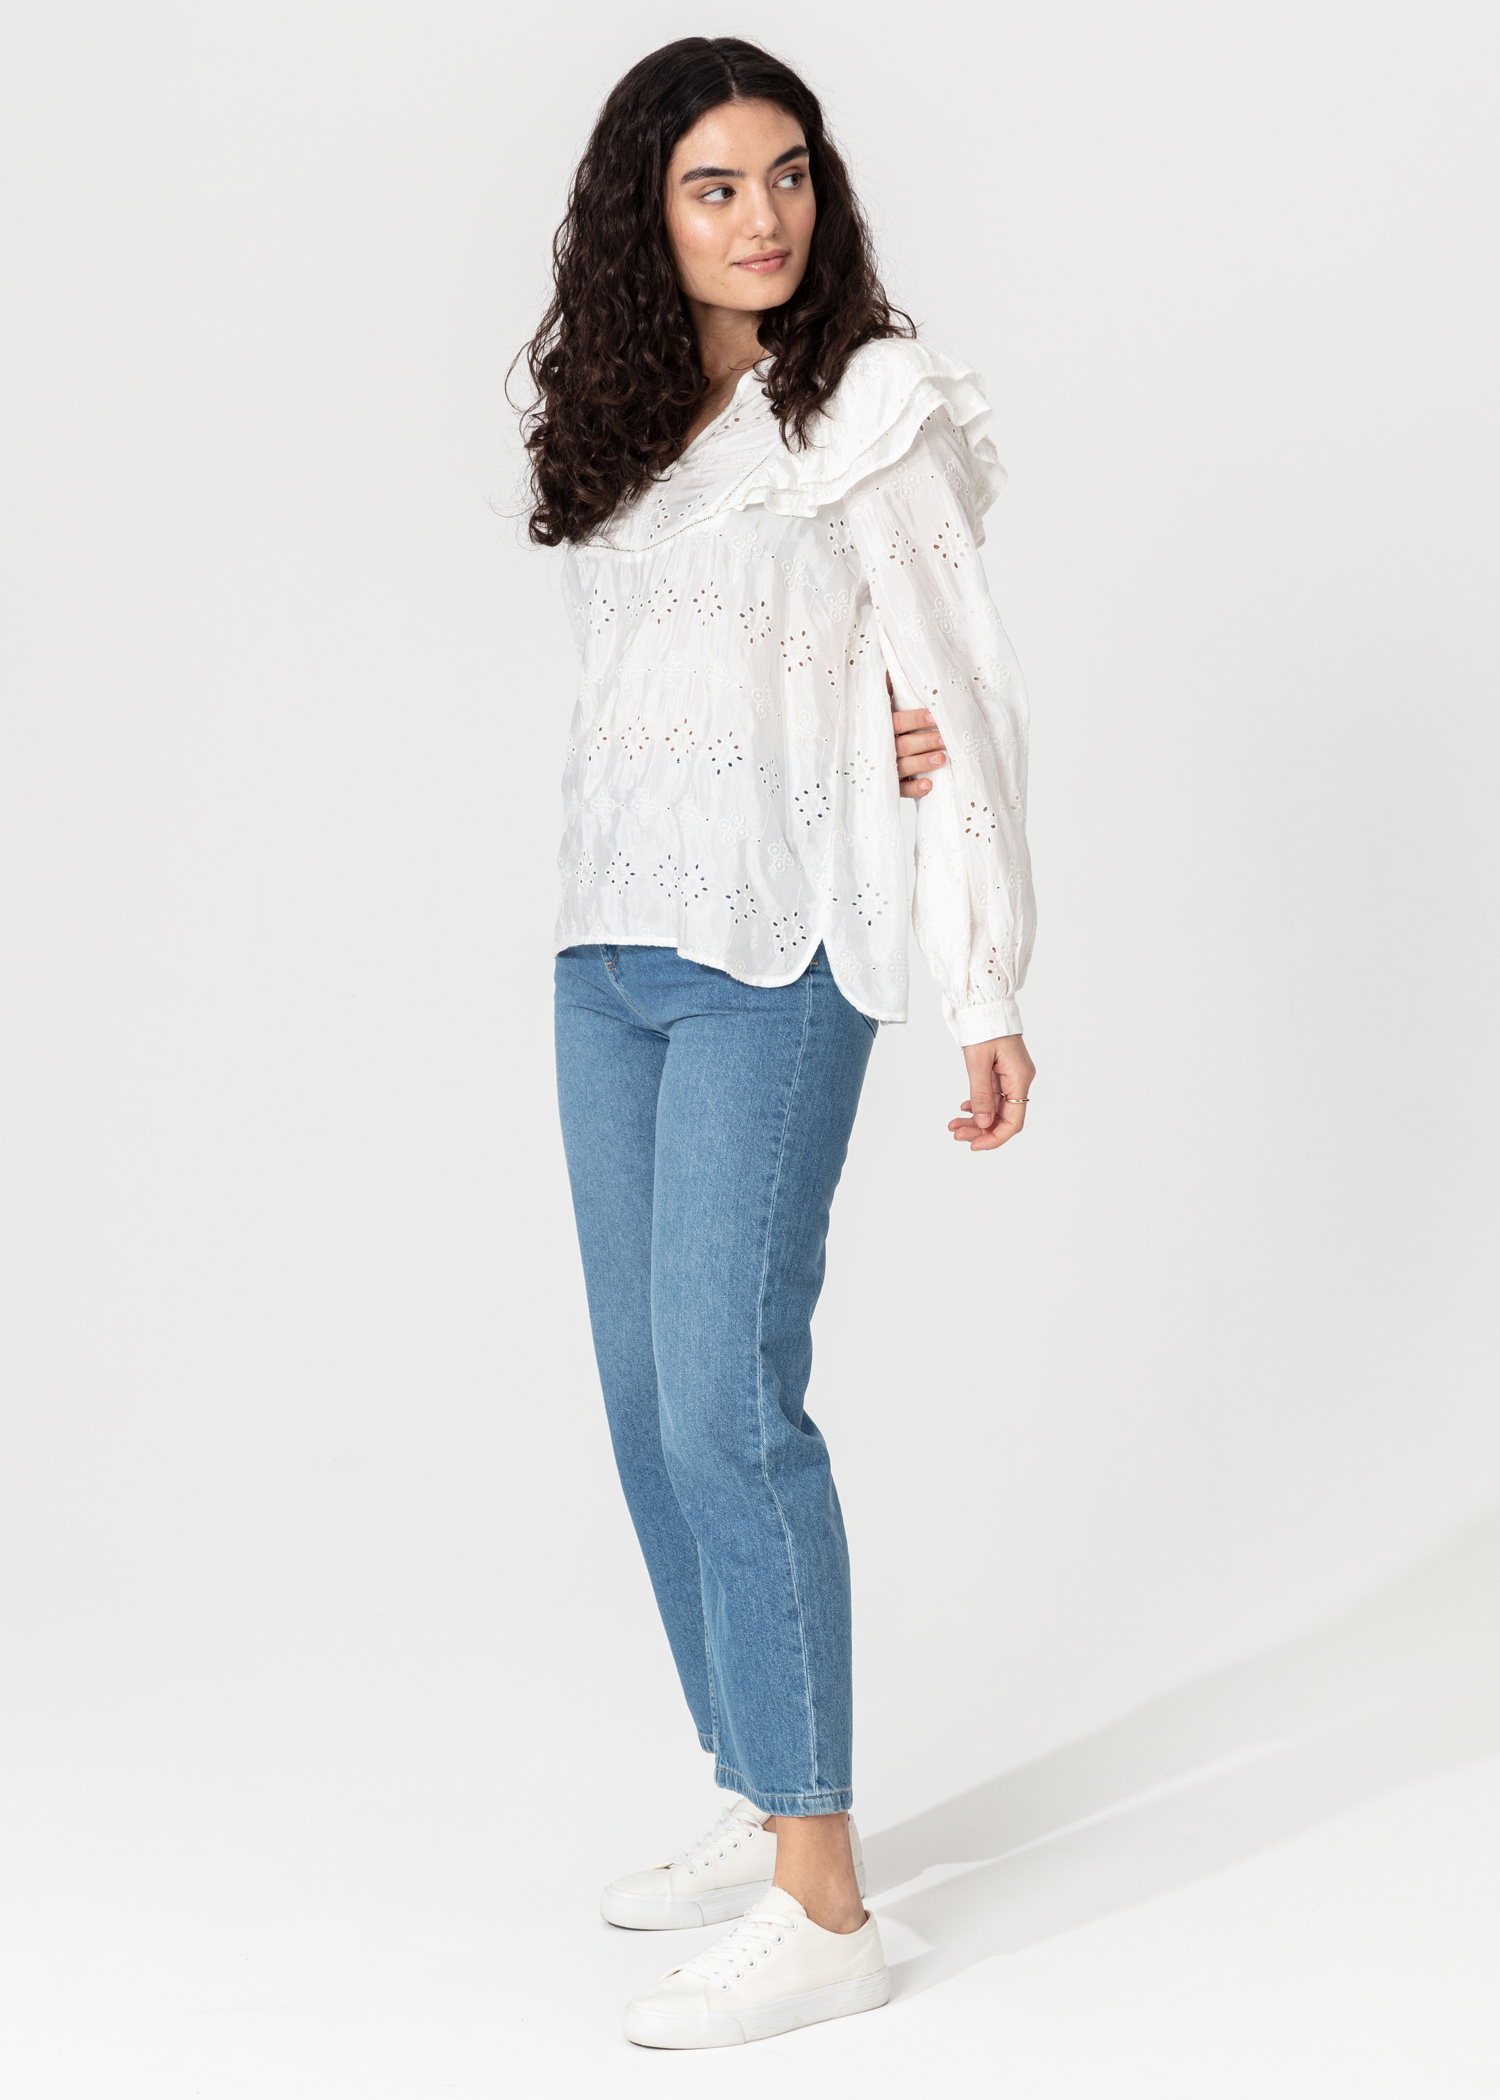 Broderie anglaise blouse thumbnail 3